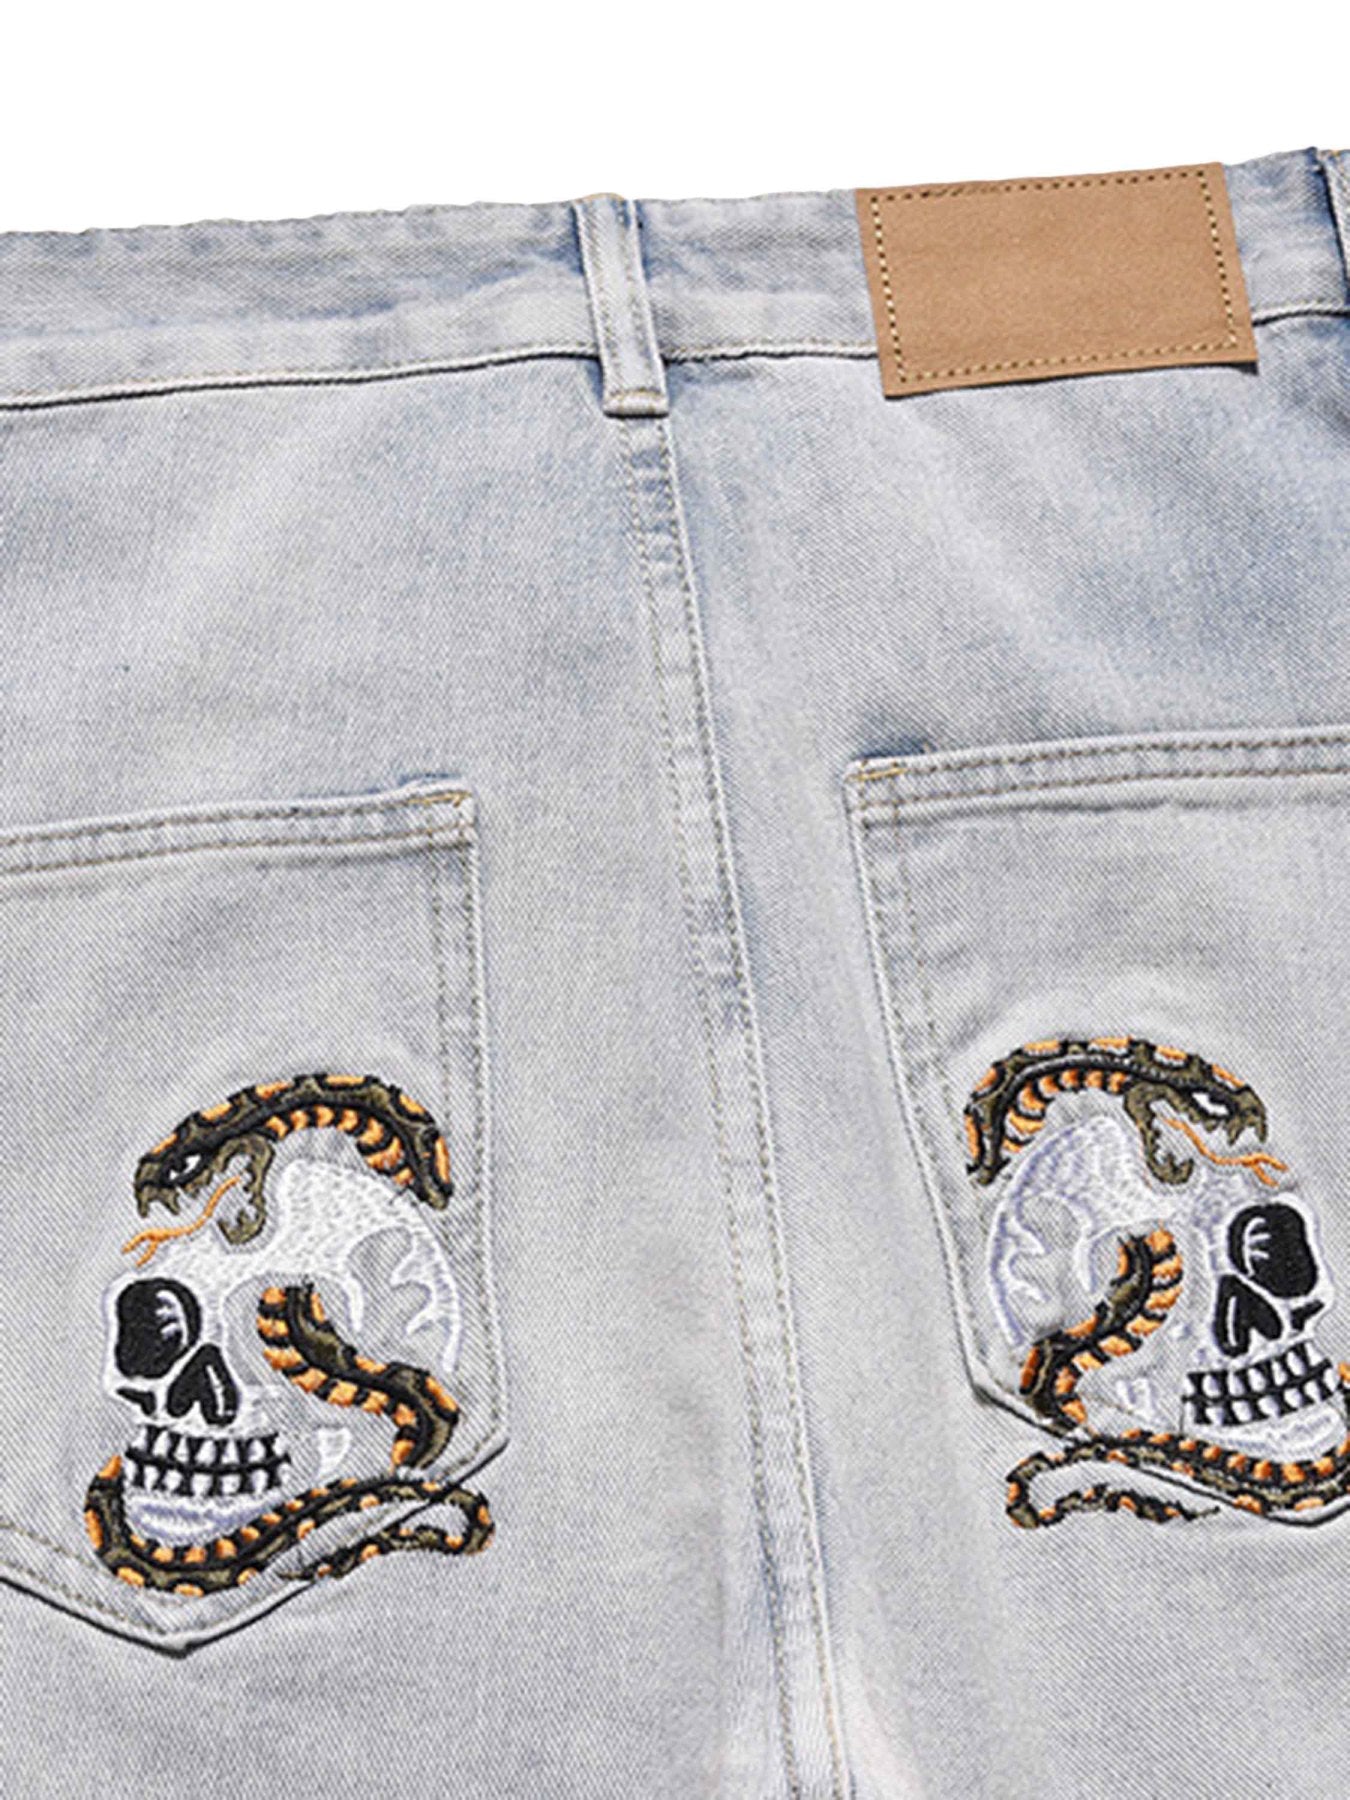 Thesupermade Skull Flame Monogram Embroidered Slim Fit Jeans